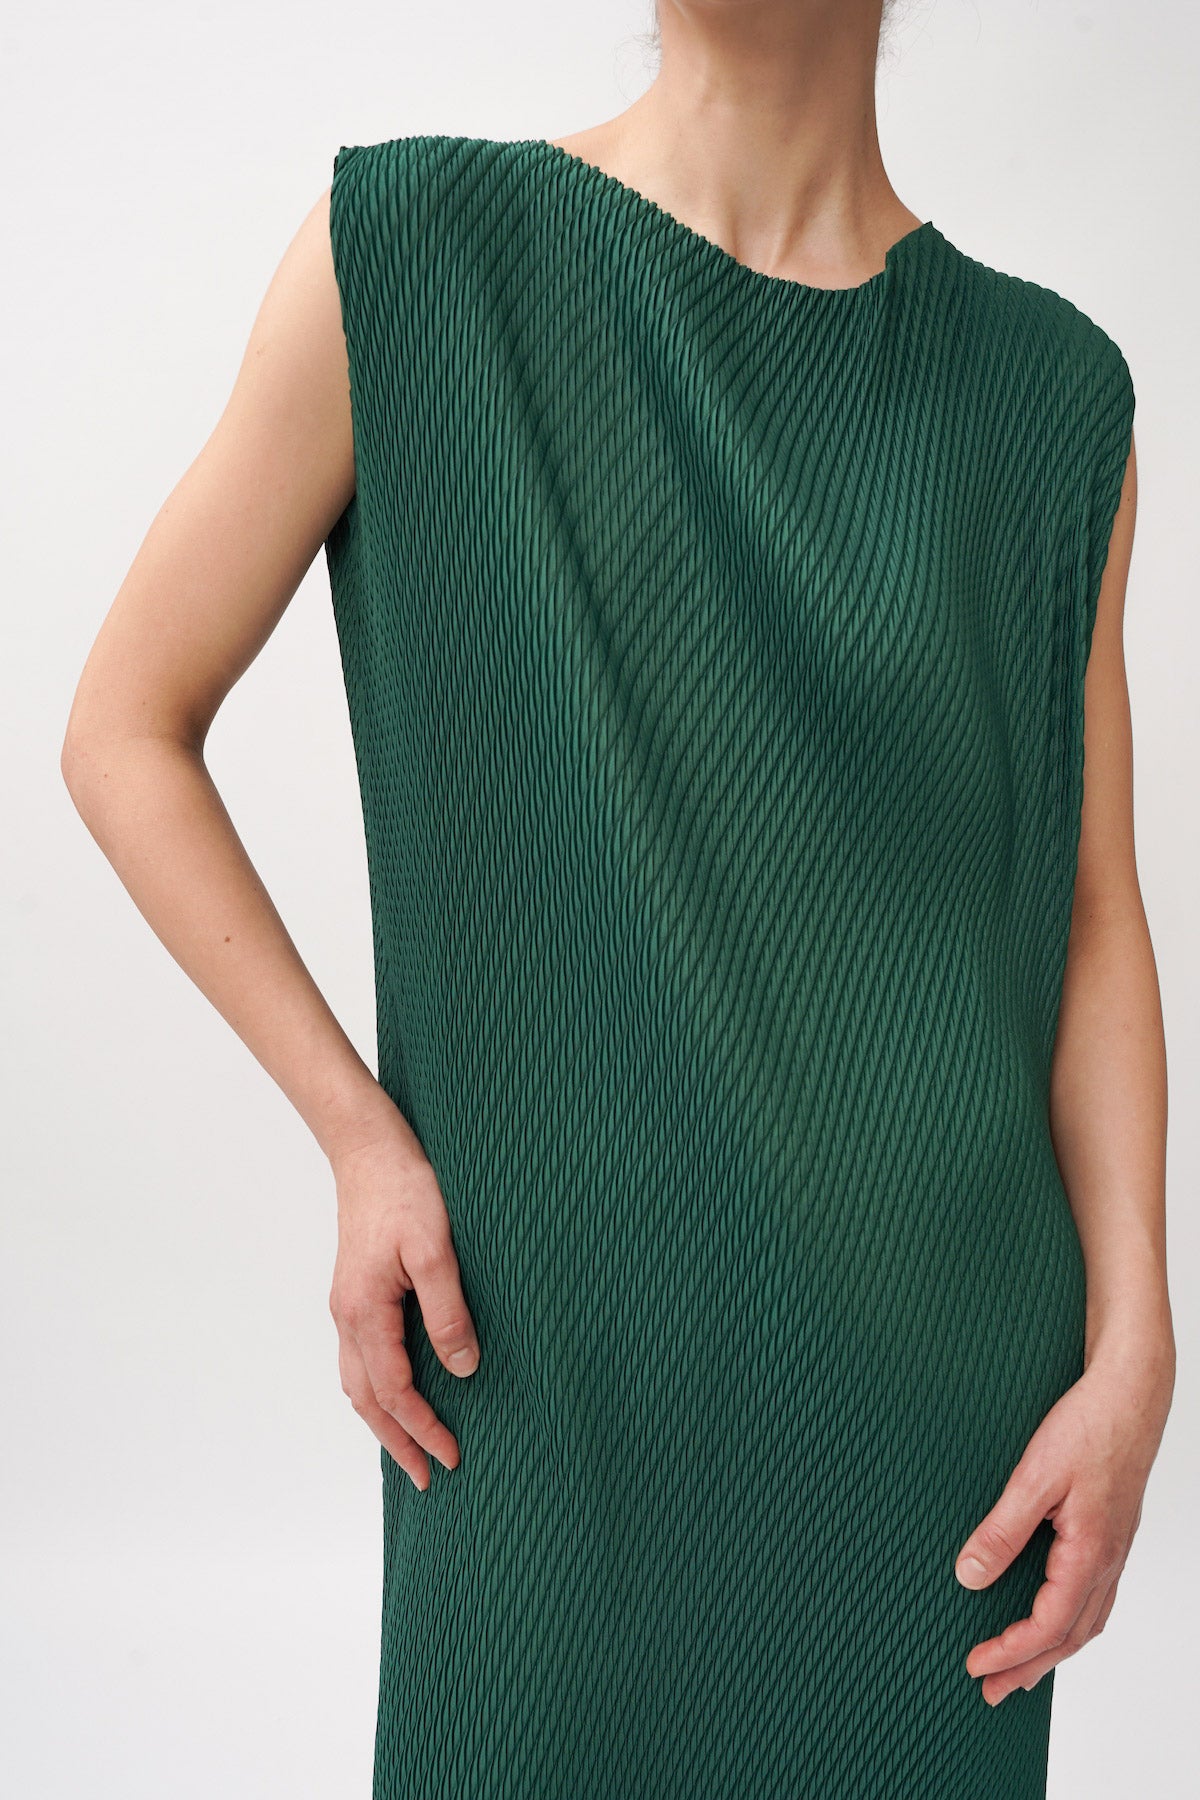 Galicia Pleats Dress In Forest Green (4 Left)